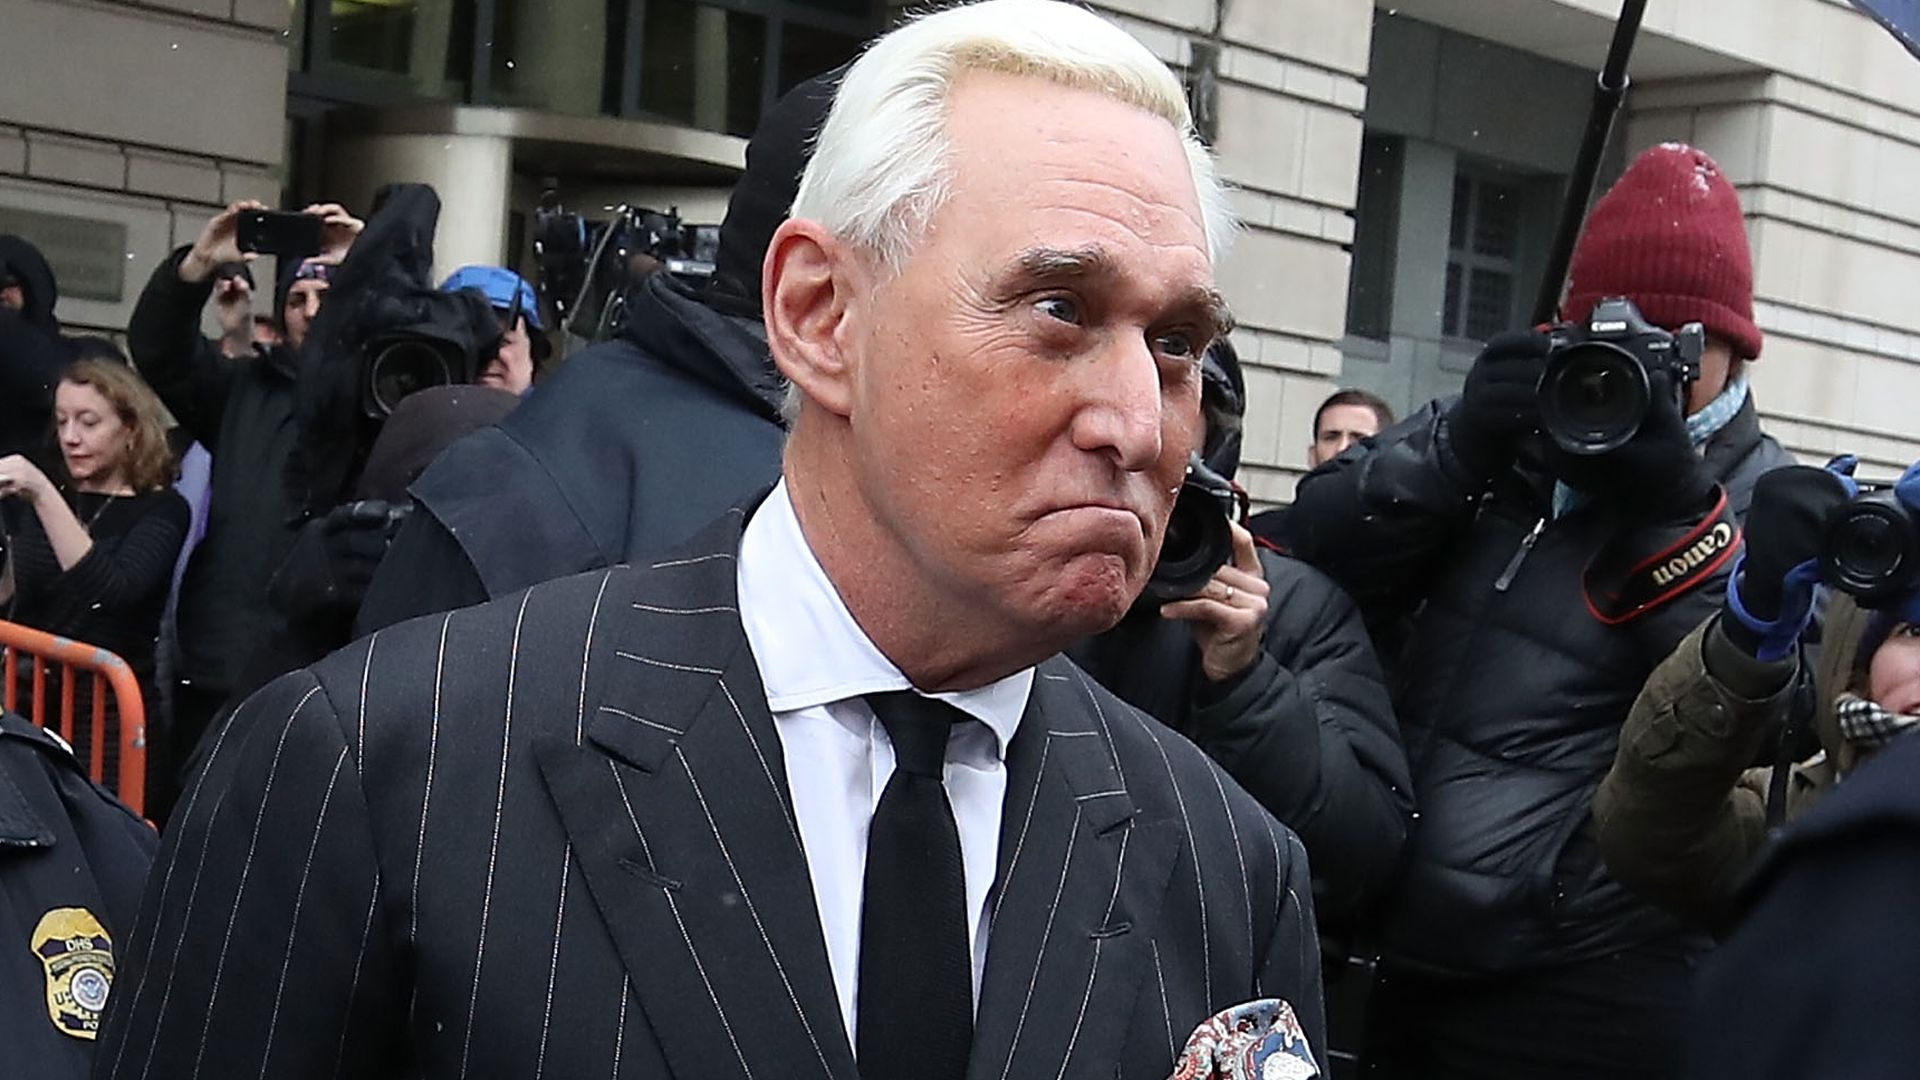 Roger Stone says his book didn't violated the gag order because it had already been published online.